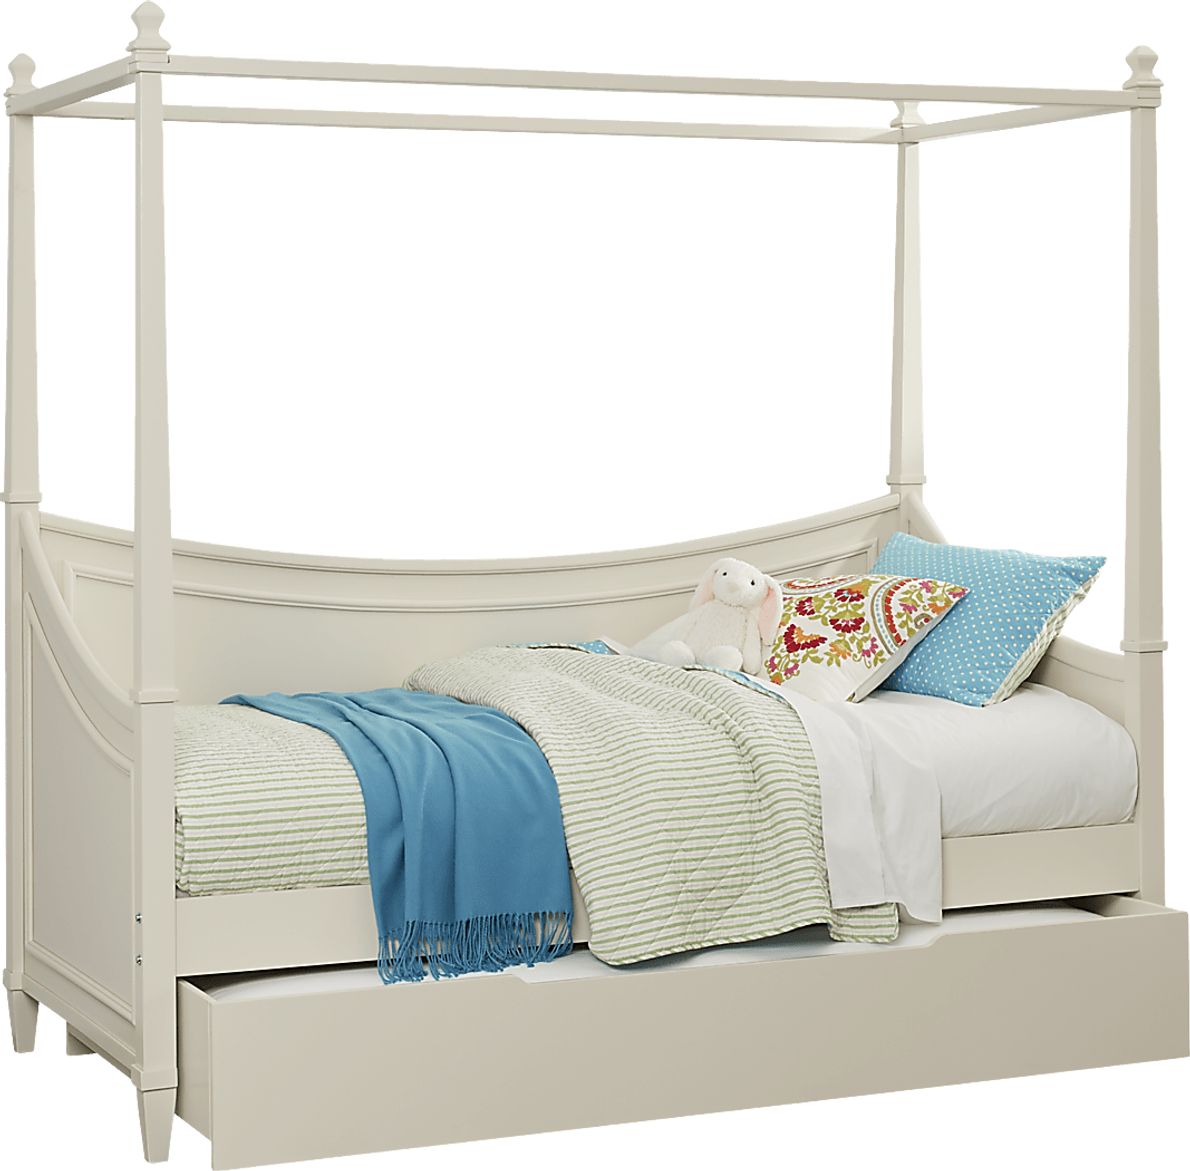 Kids Jaclyn Place Ivory 6 Pc Twin Canopy Daybed Bedroom